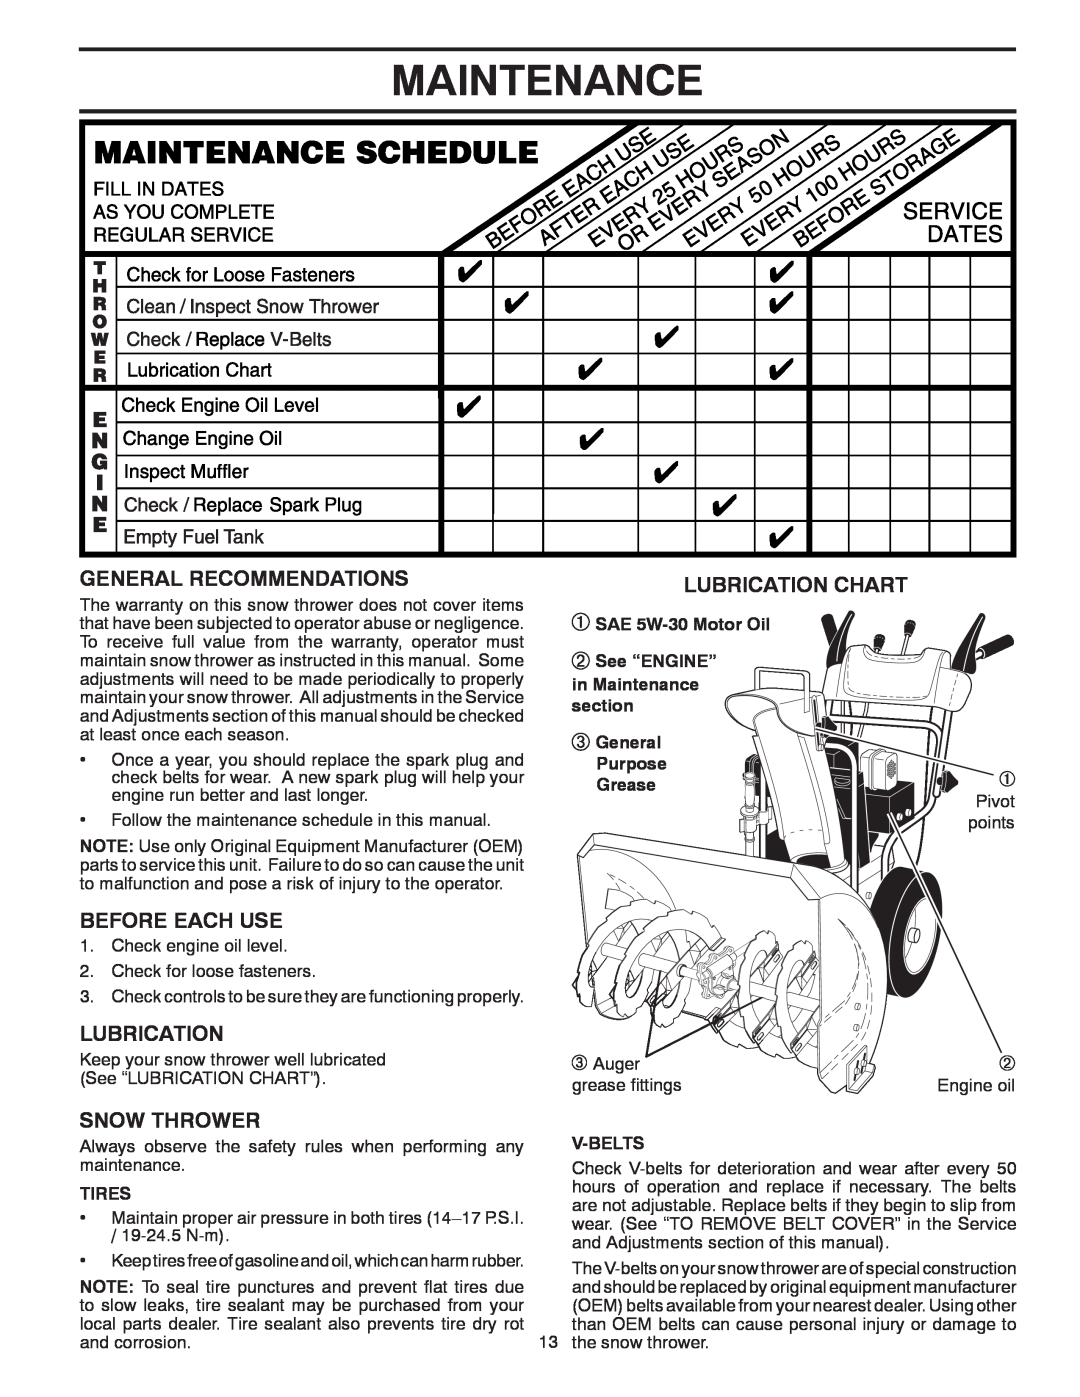 Poulan 416829 Maintenance, General Recommendations, Before Each Use, Lubrication Chart, Snow Thrower, Purpose Grease 